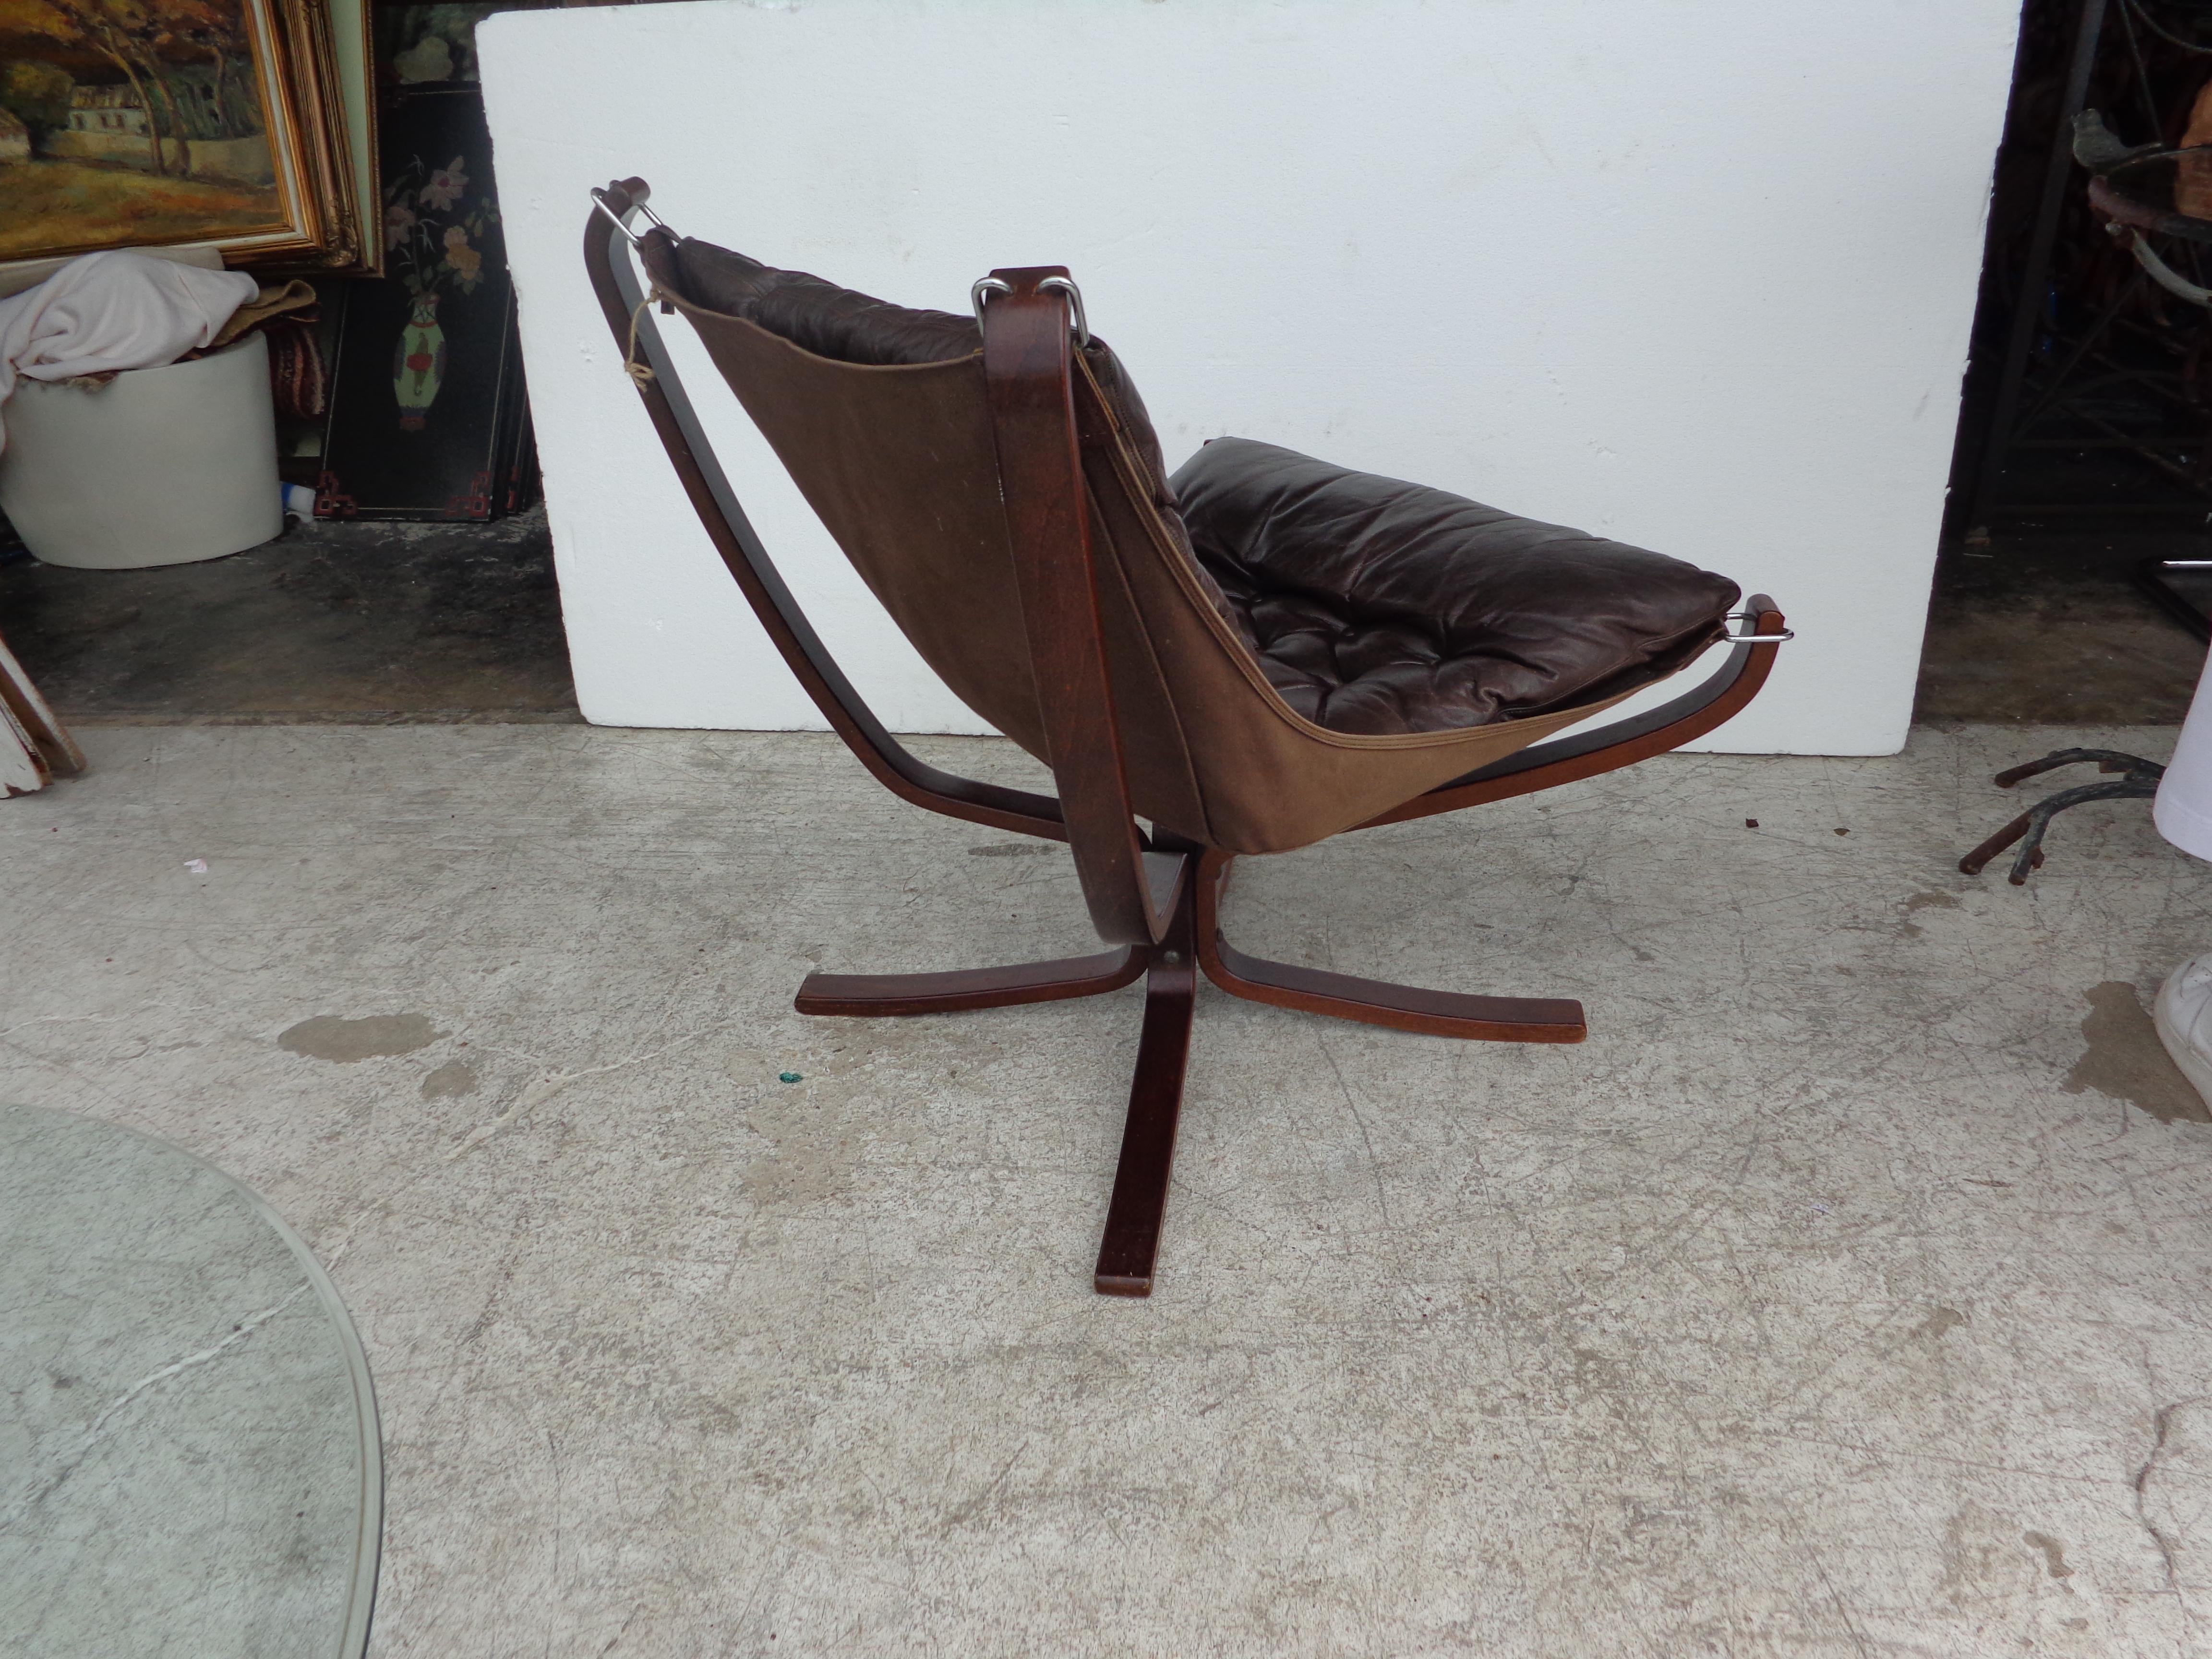 Sigurd Ressell Falcon leather lounge chair by Vatne Mobler

Nicely aged leather with a sculptural bentwood frame in a rosewood stain.


Measures: Height: 38.5 inches / 97.79 cm
Width: 29 inches / 73.66 cm
Depth: 33 inches / 83.82 cm.
 